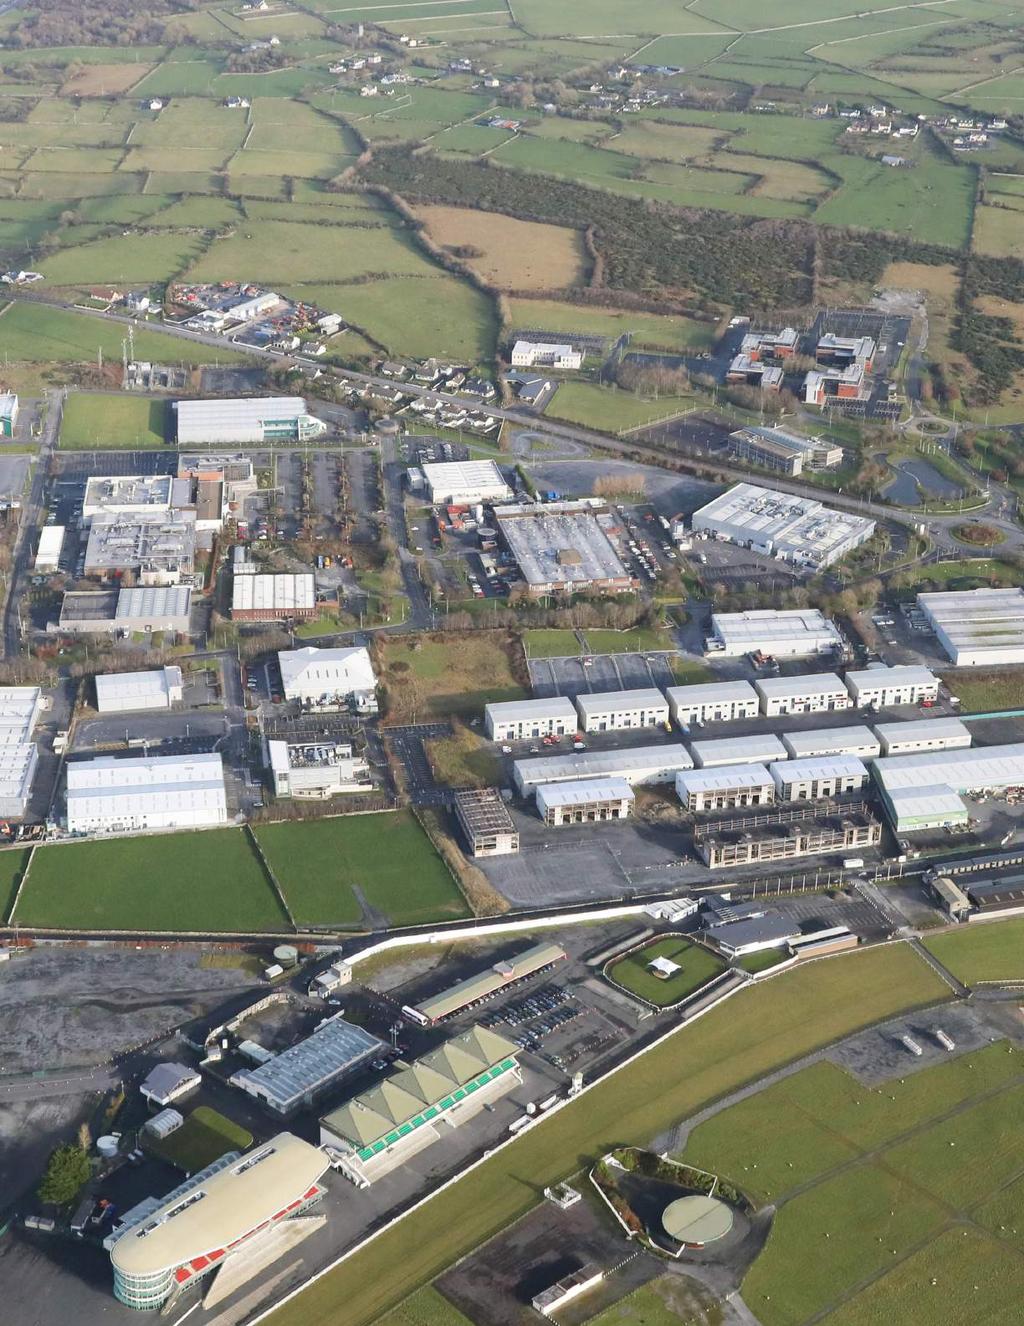 RACECOURSE TECHNOLOGY PARK BALLYBRIT GALWAY TO LET Prime suburban office and